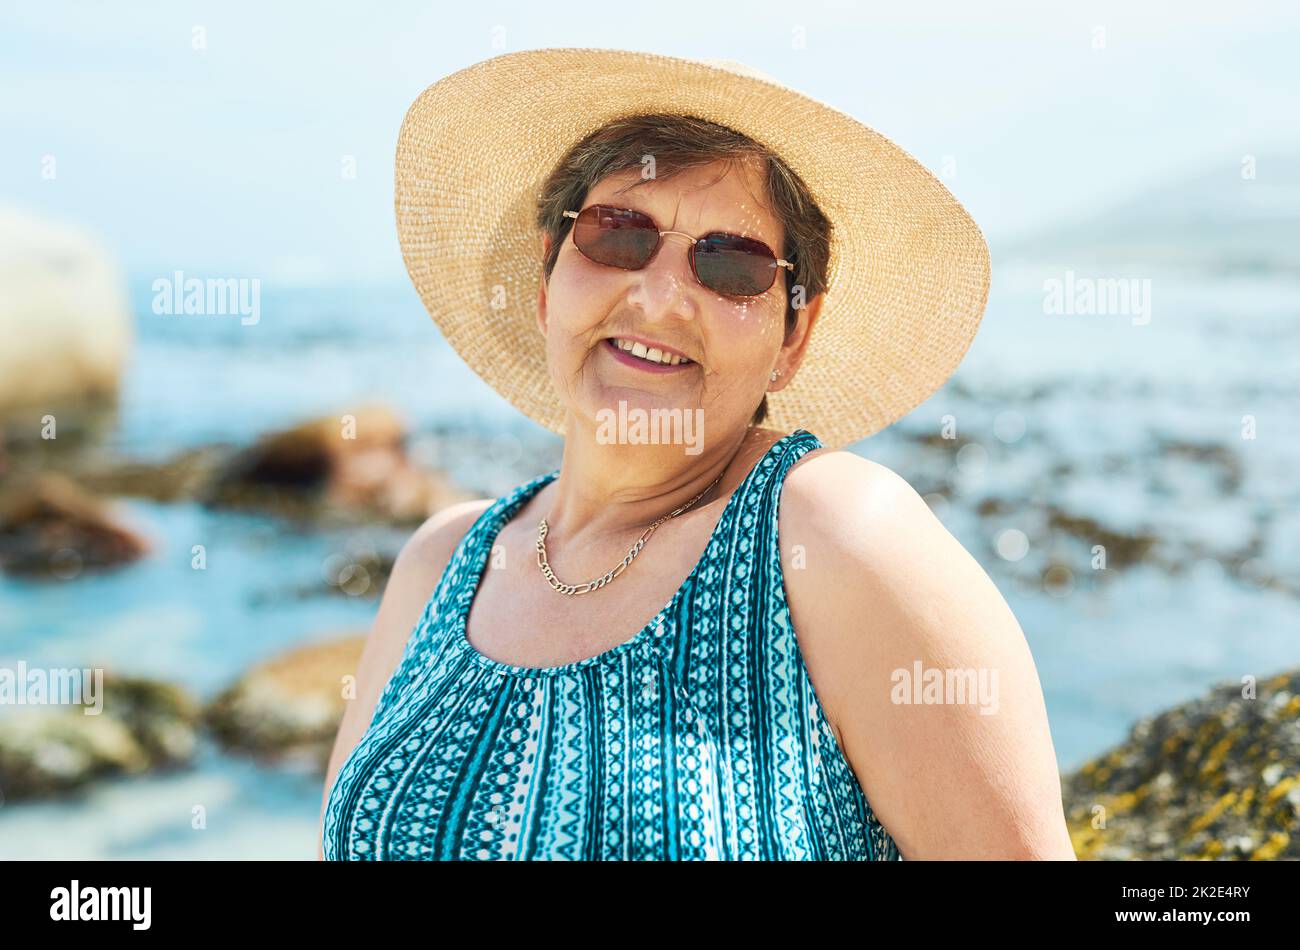 Time to get my tan on. Shot of an attractive mature woman standing alone during a day out on the beach. Stock Photo